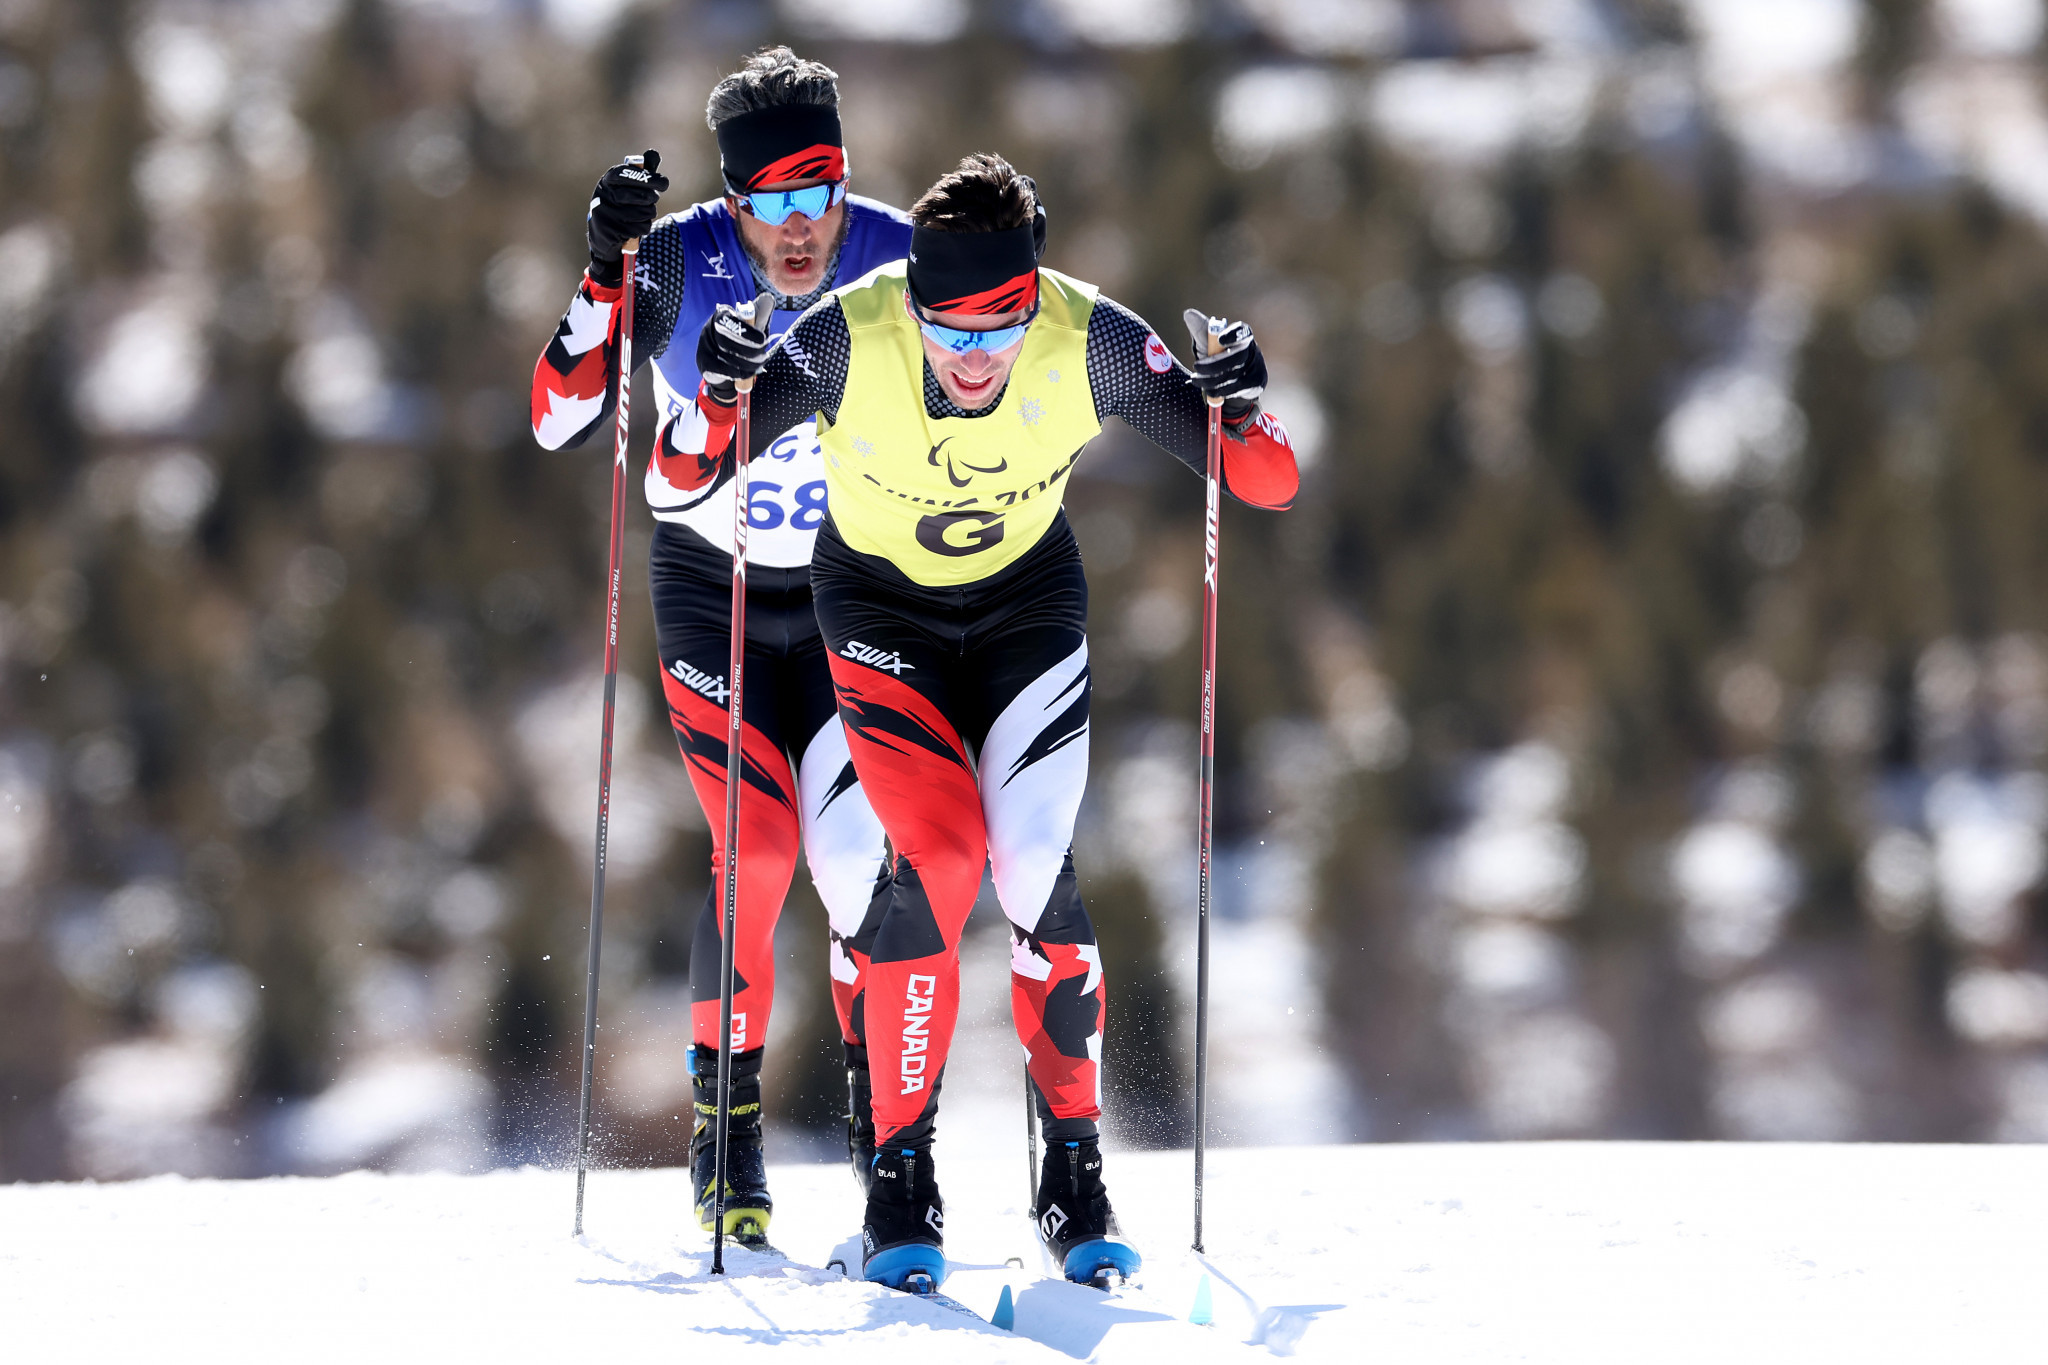 McKeever makes it 14 Paralympic gold medals after surging to long-distance cross-country victory